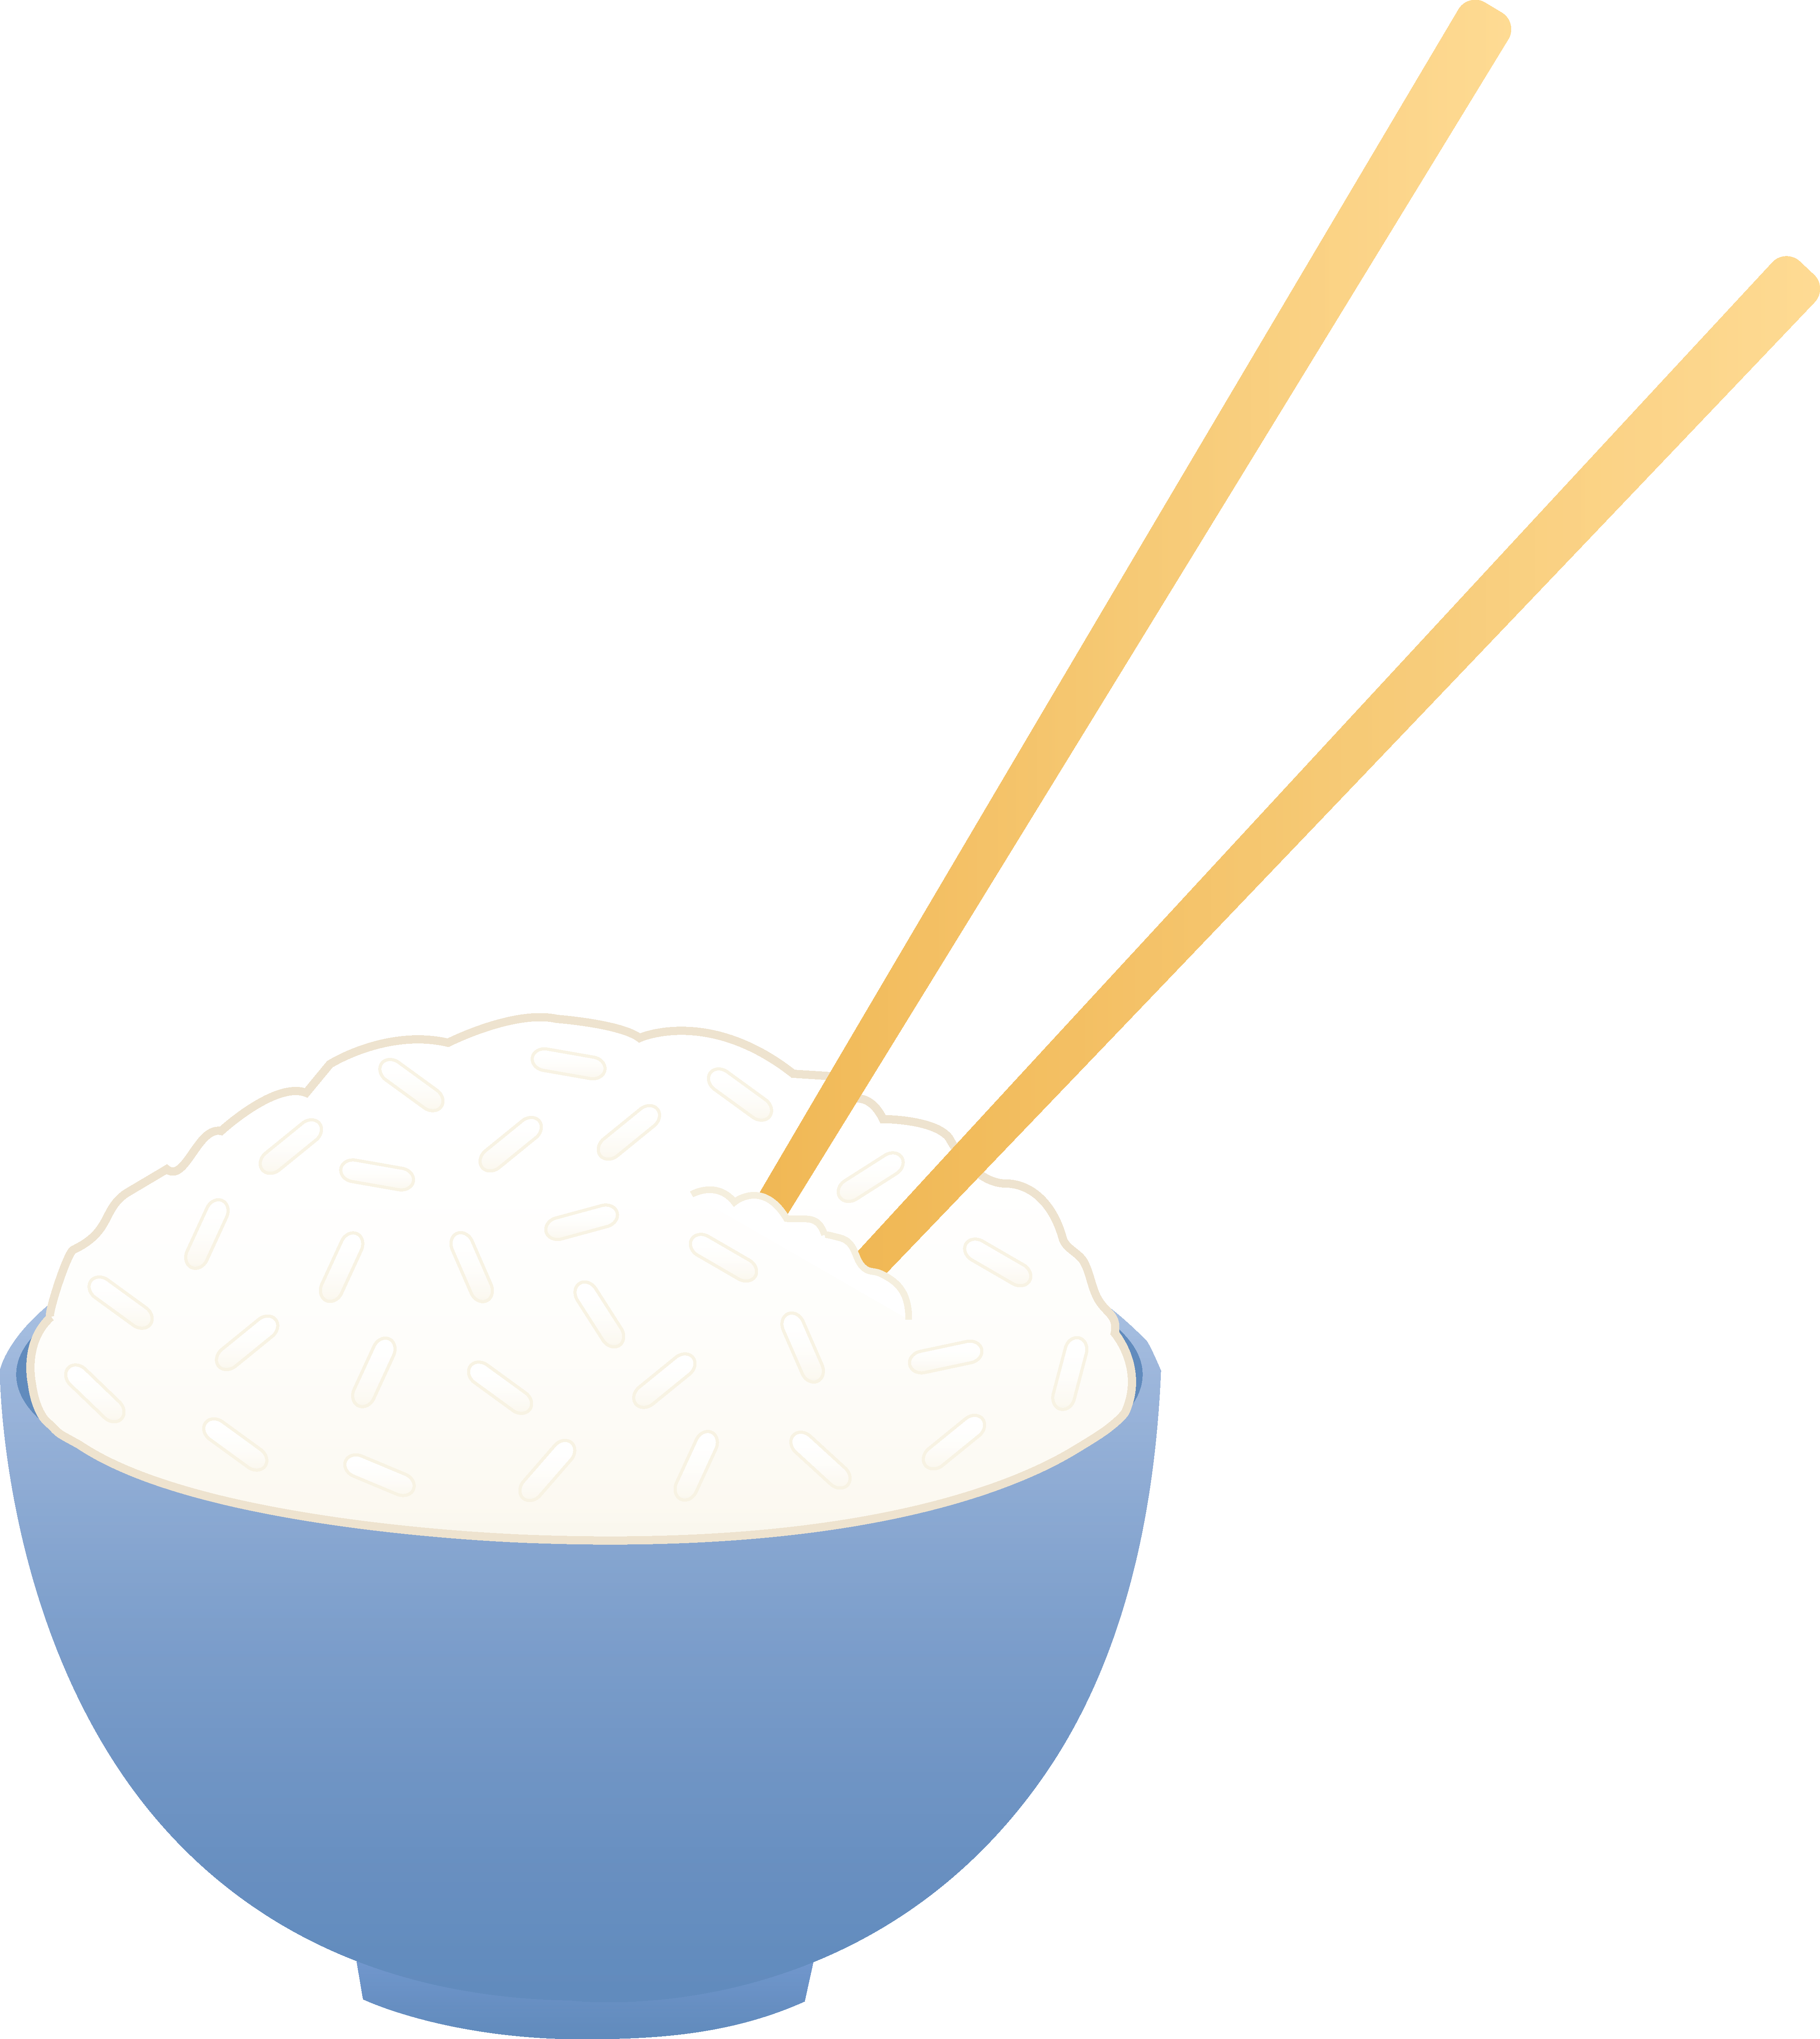 Bowl Of Rice With Chopsticks (4644x5202)